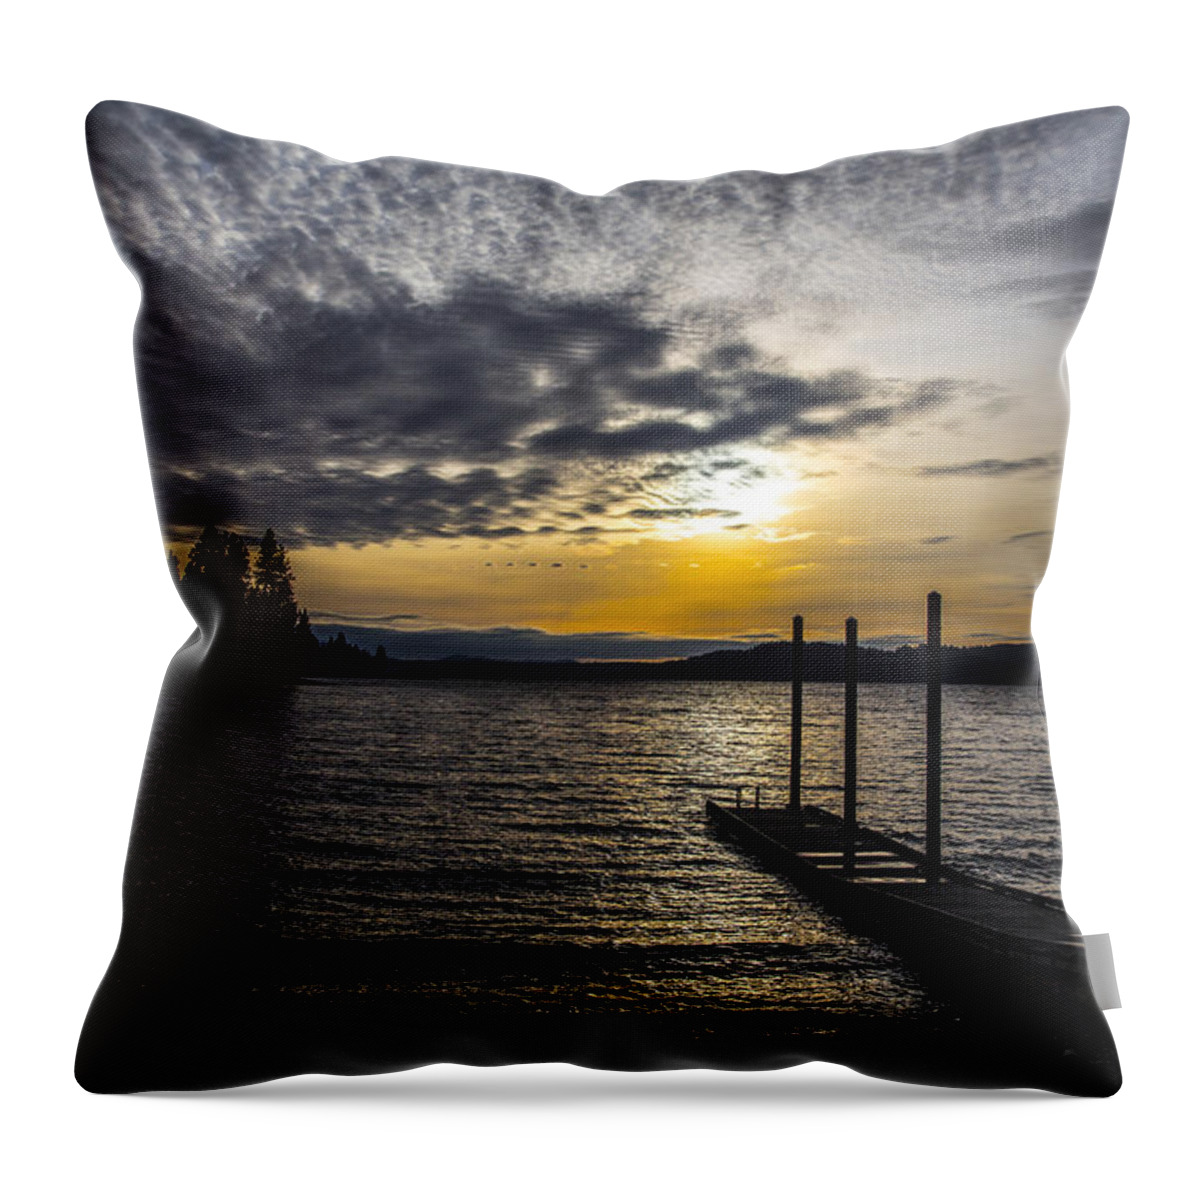 Outdoors Throw Pillow featuring the photograph Harbor by Angus HOOPER III